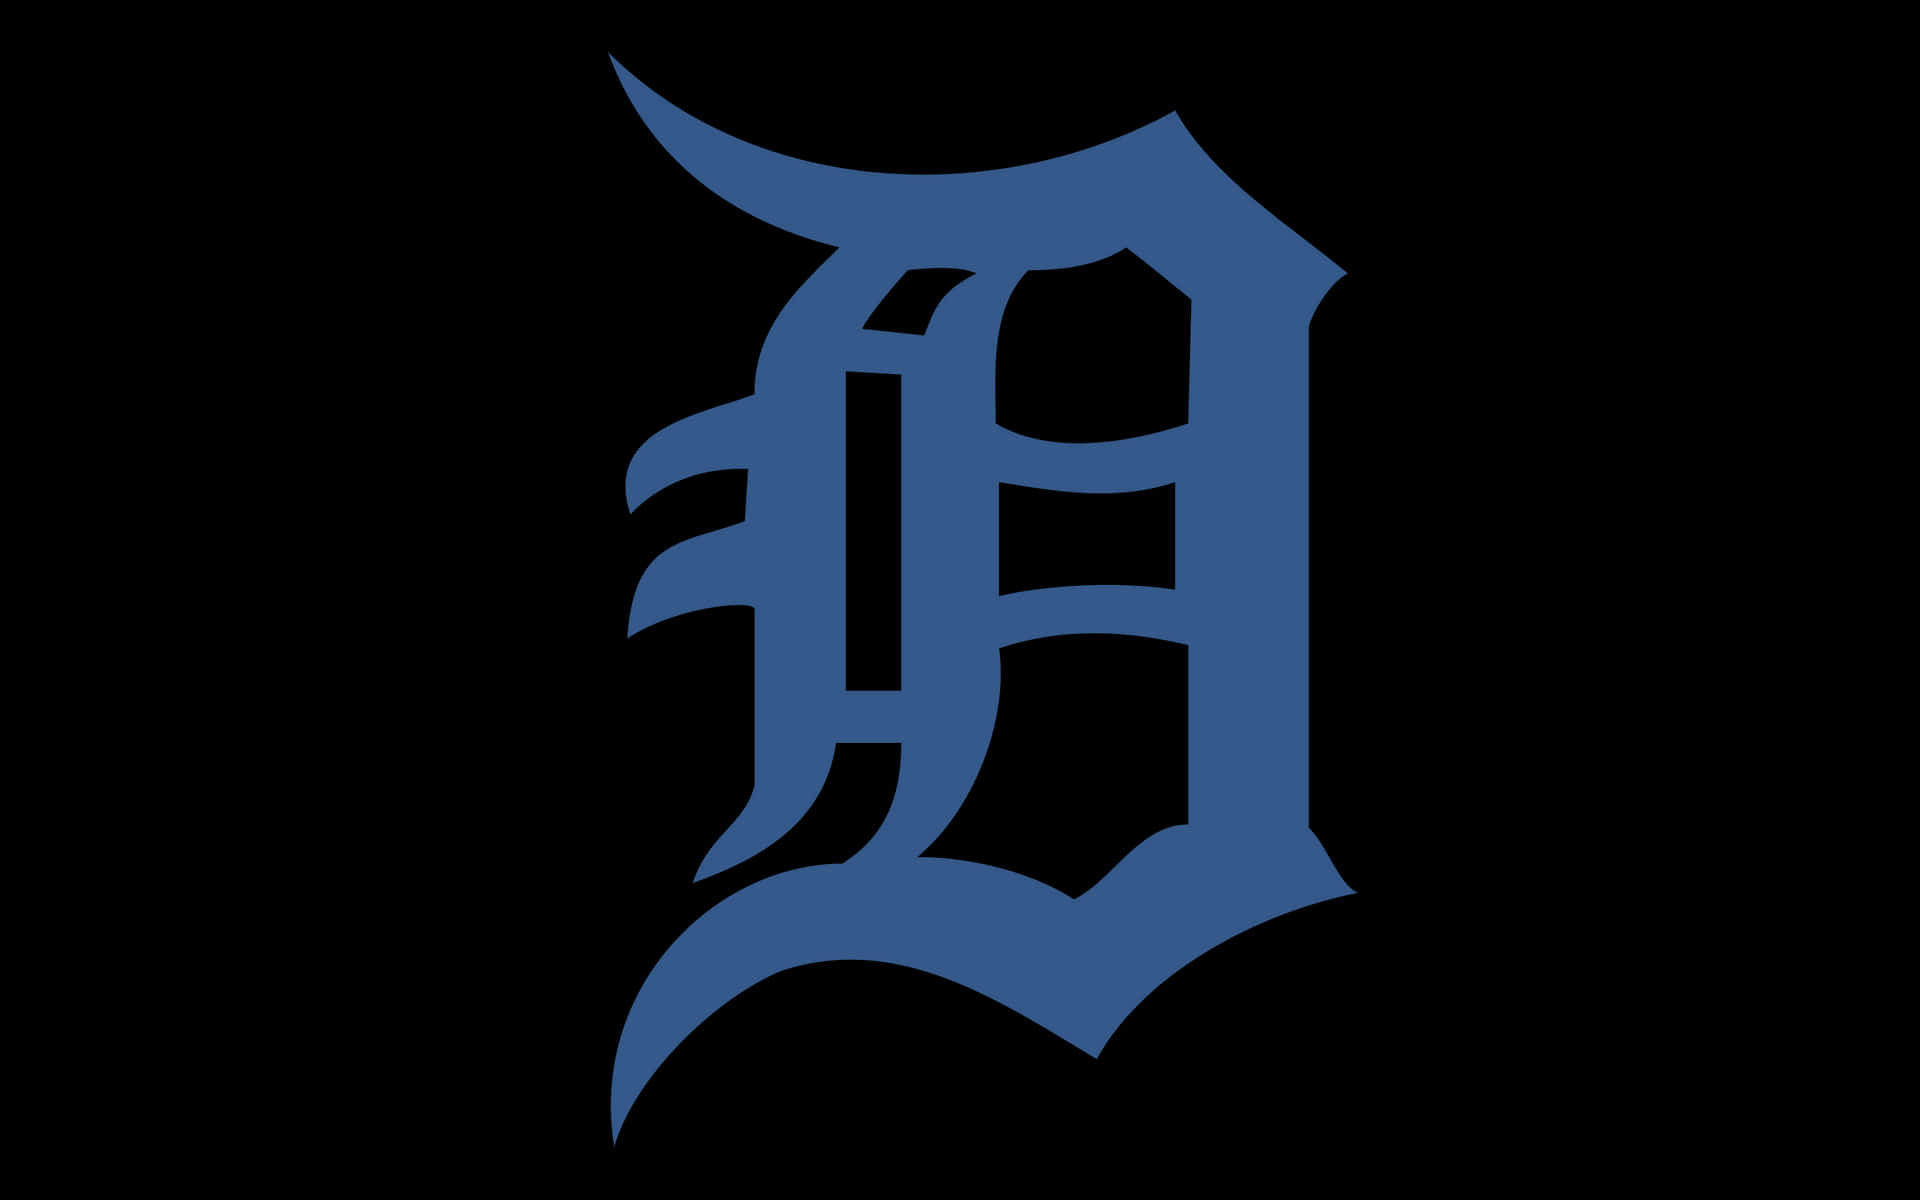 Detroit Tigers sign Keston Hiura Detroit Tigers Acquire T.J. Hopkins Detroit Tigers Opening Day Starting Lineup Andre Lipcius Detroit Tigers Cut Detroit Tigers OF Riley Greene Detroit Tigers P Tyler Mattison Detroit Tigers Pitching Rotation Detroit Tigers injury Report Andy Ibanez Detroit Tigers Activate Shelby Miller Alex Lange